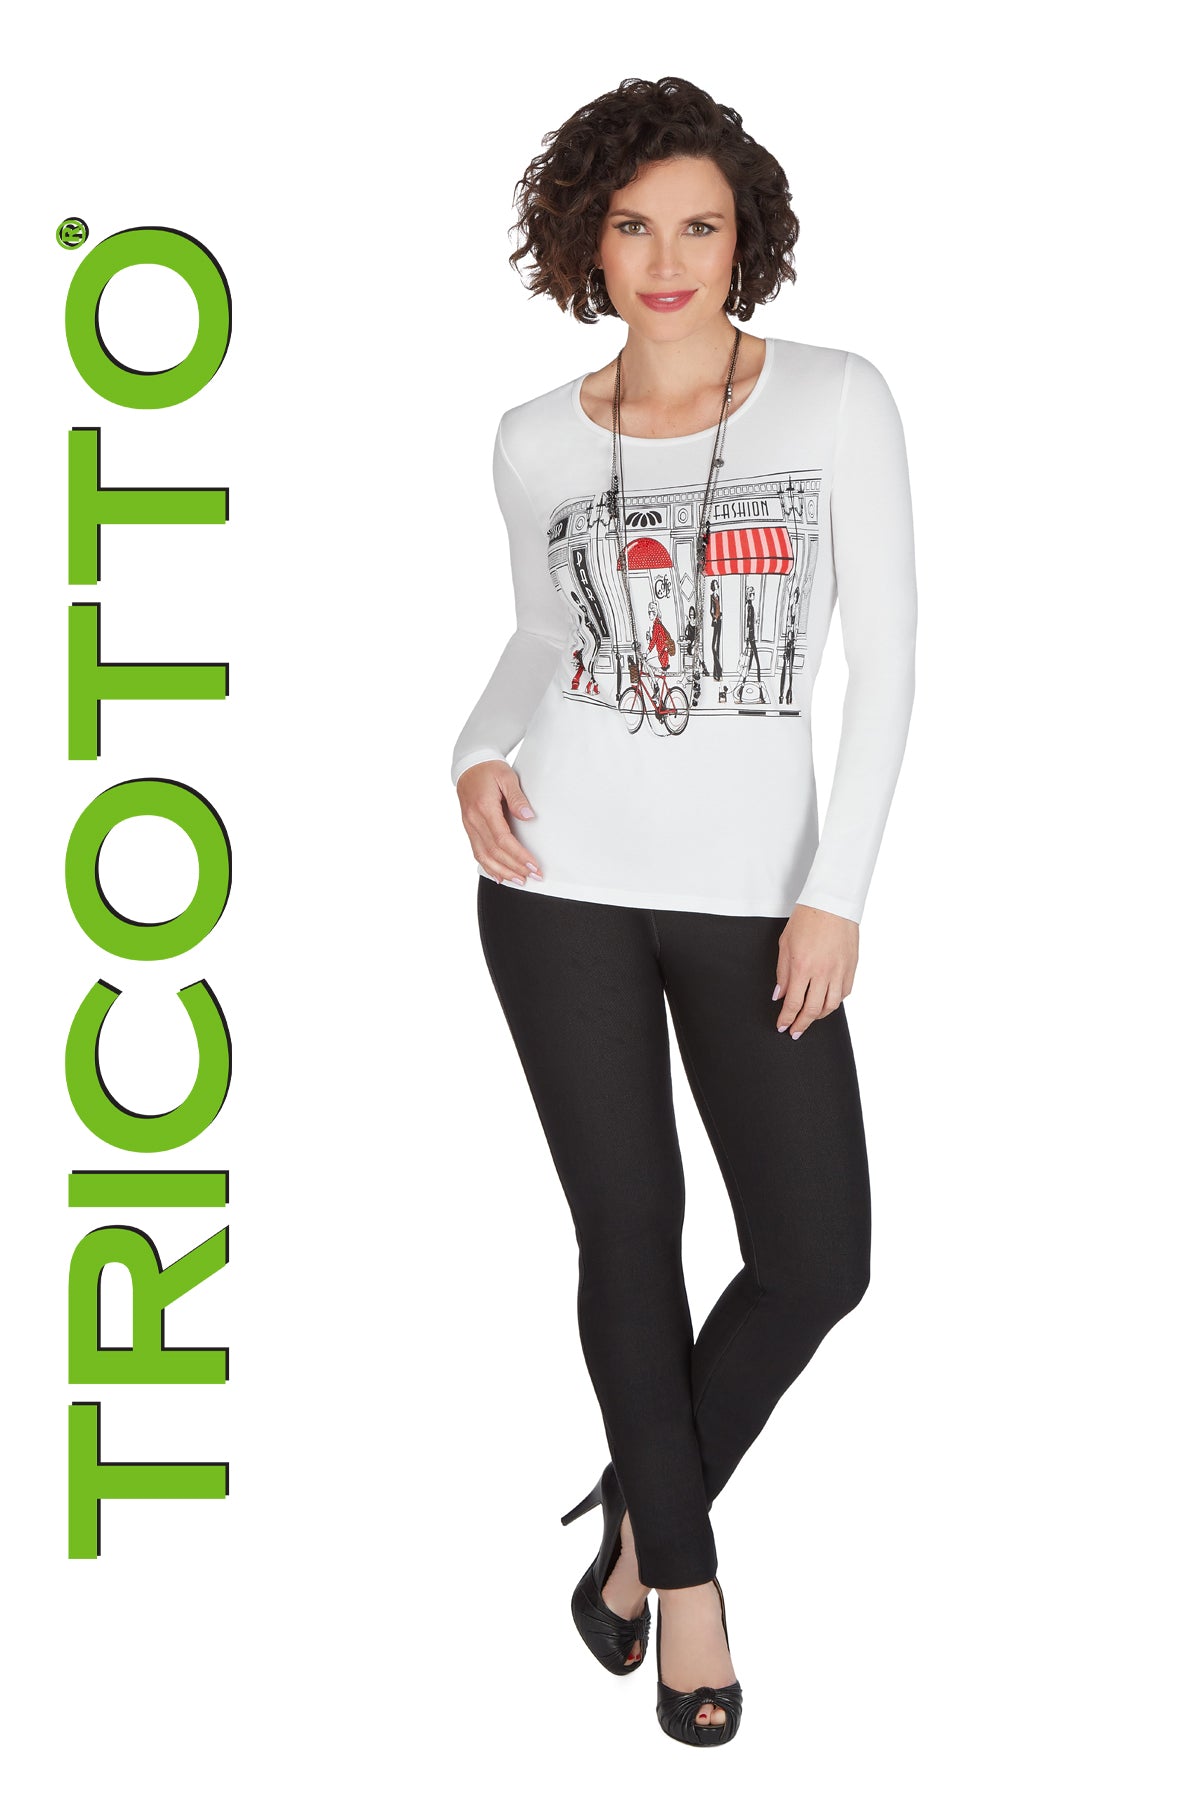 Tricotto T-shirts-Tricotto Autumn 2021-Tricotto Fashion Montreal-Tricotto Fashion Quebec-Buy Tricotto Clothing Online-Jane & John Clothing-Tricotto Sweaters